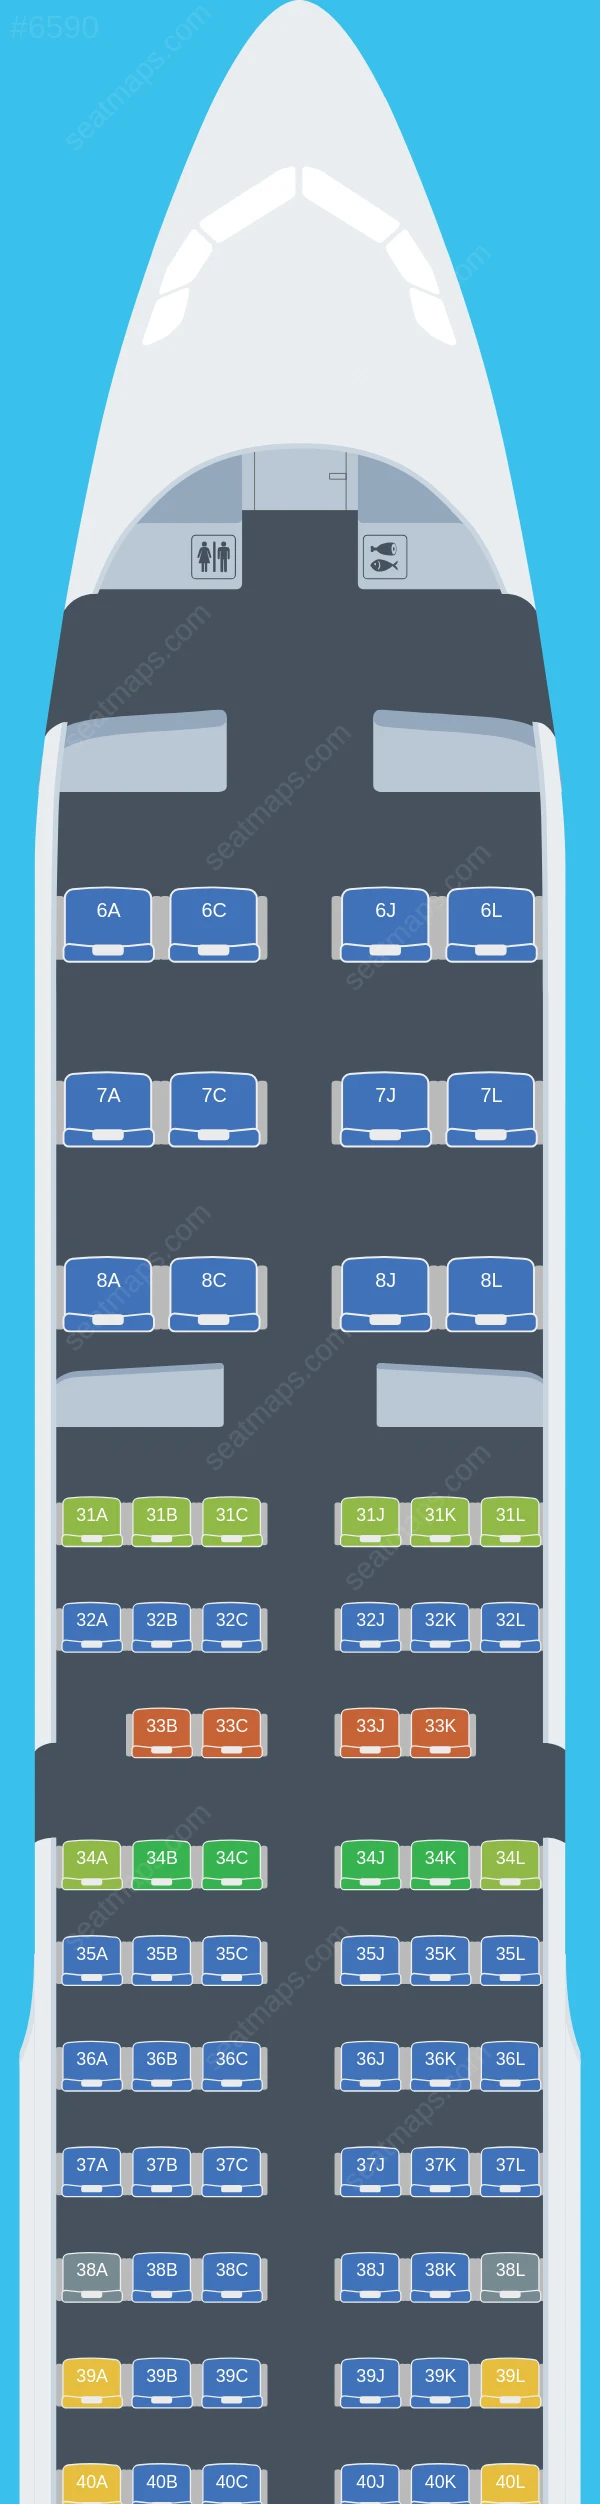 China Eastern Airbus A321-200 V.3 seatmap preview